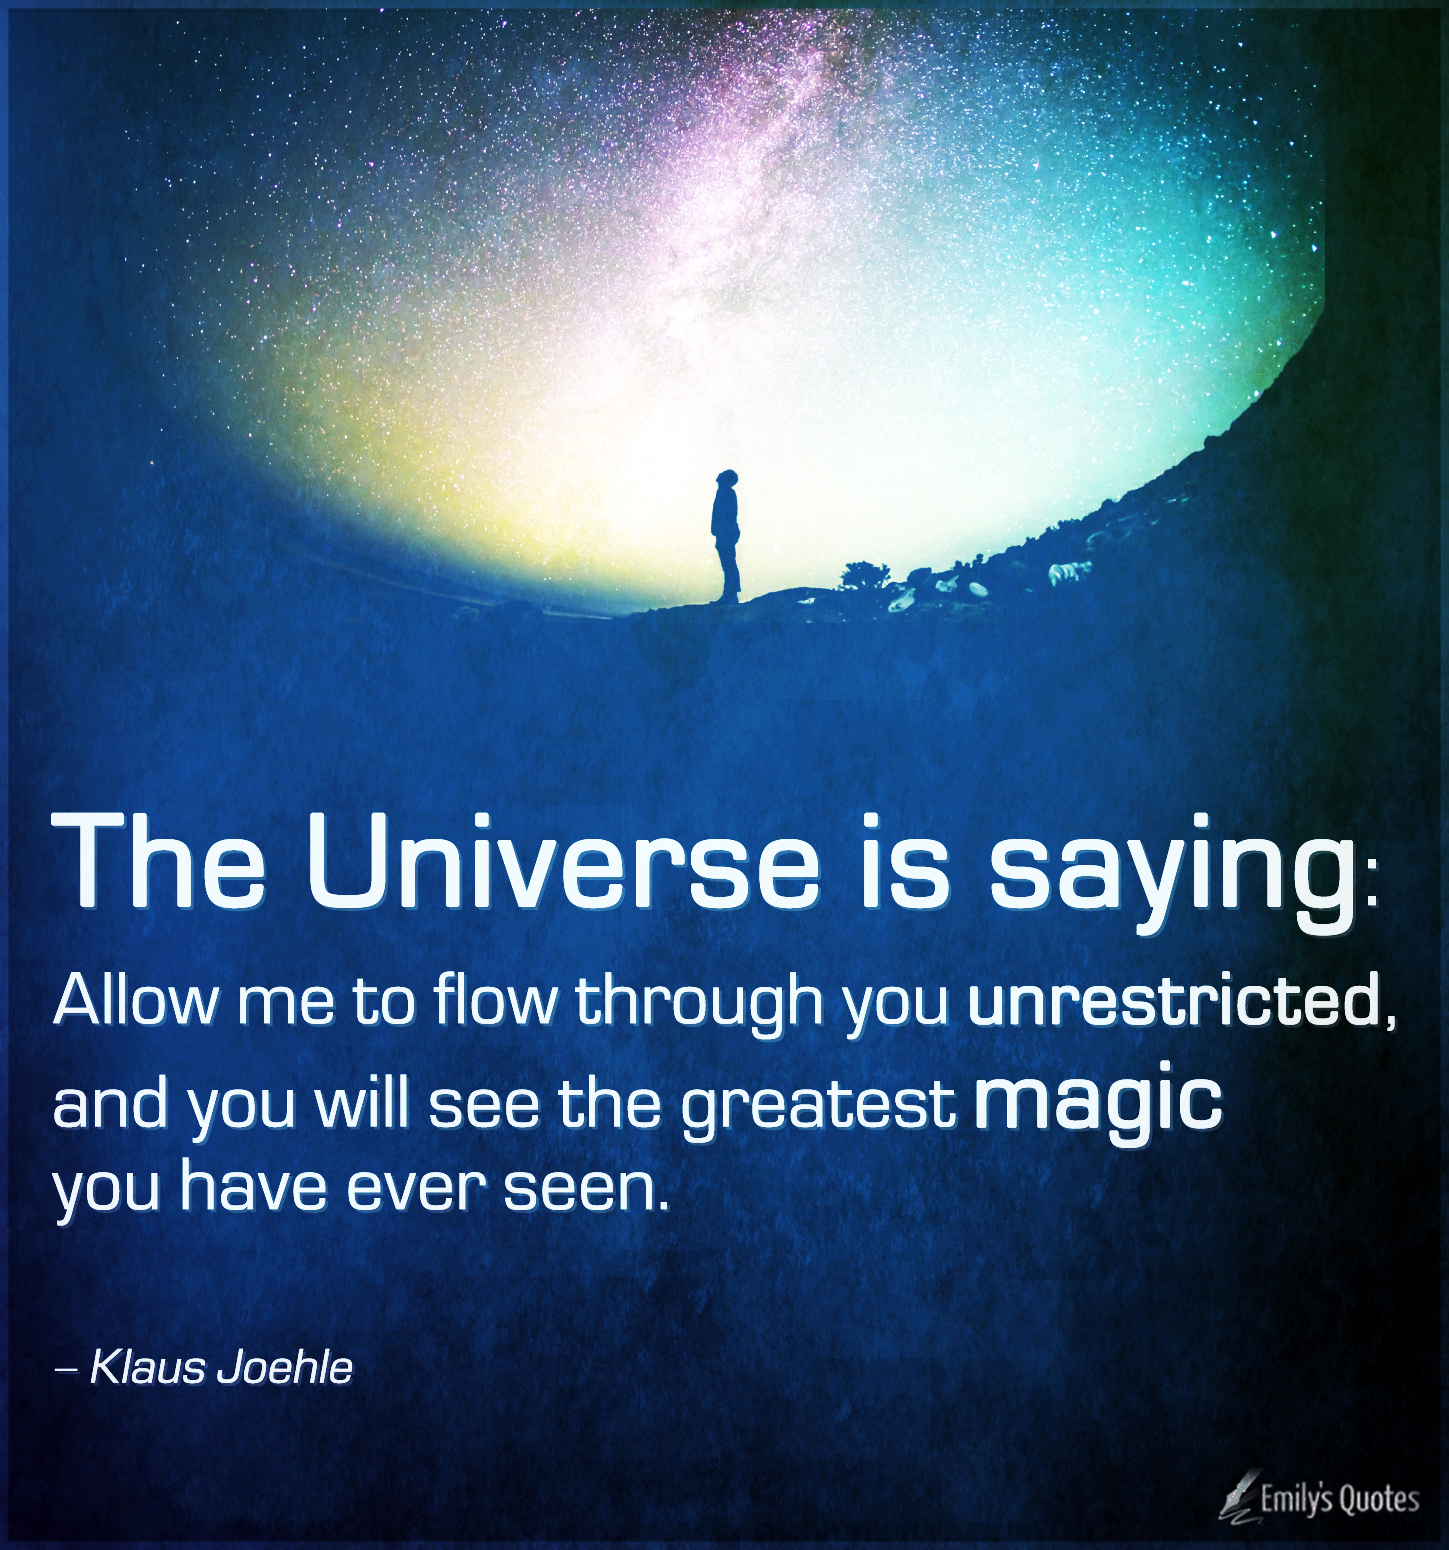 The Universe is saying – Allow me to flow through you unrestricted